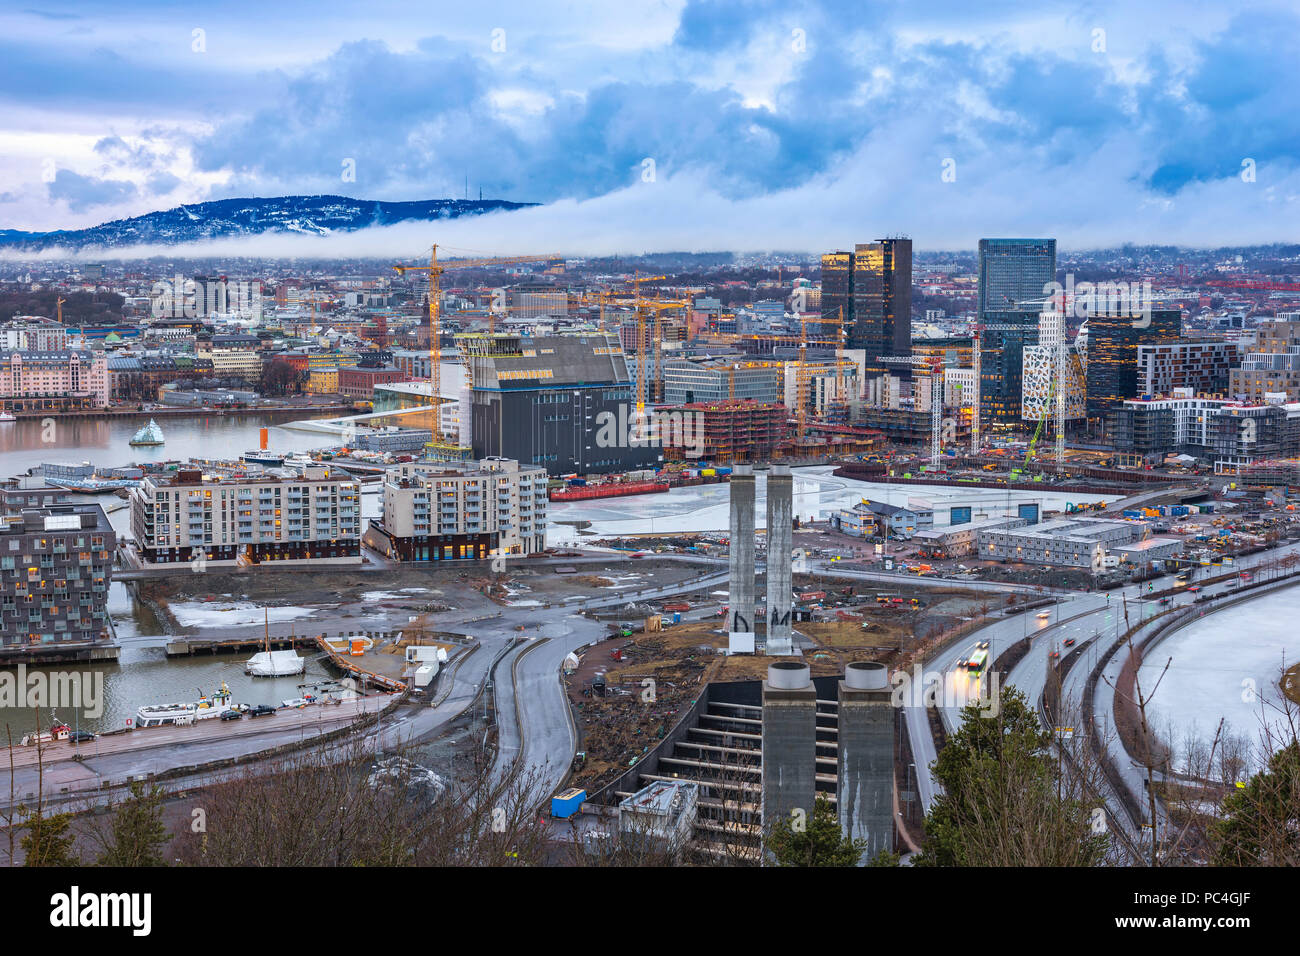 Oslo aerial view city skyline at business district and Barcode Project, Oslo Norway Stock Photo